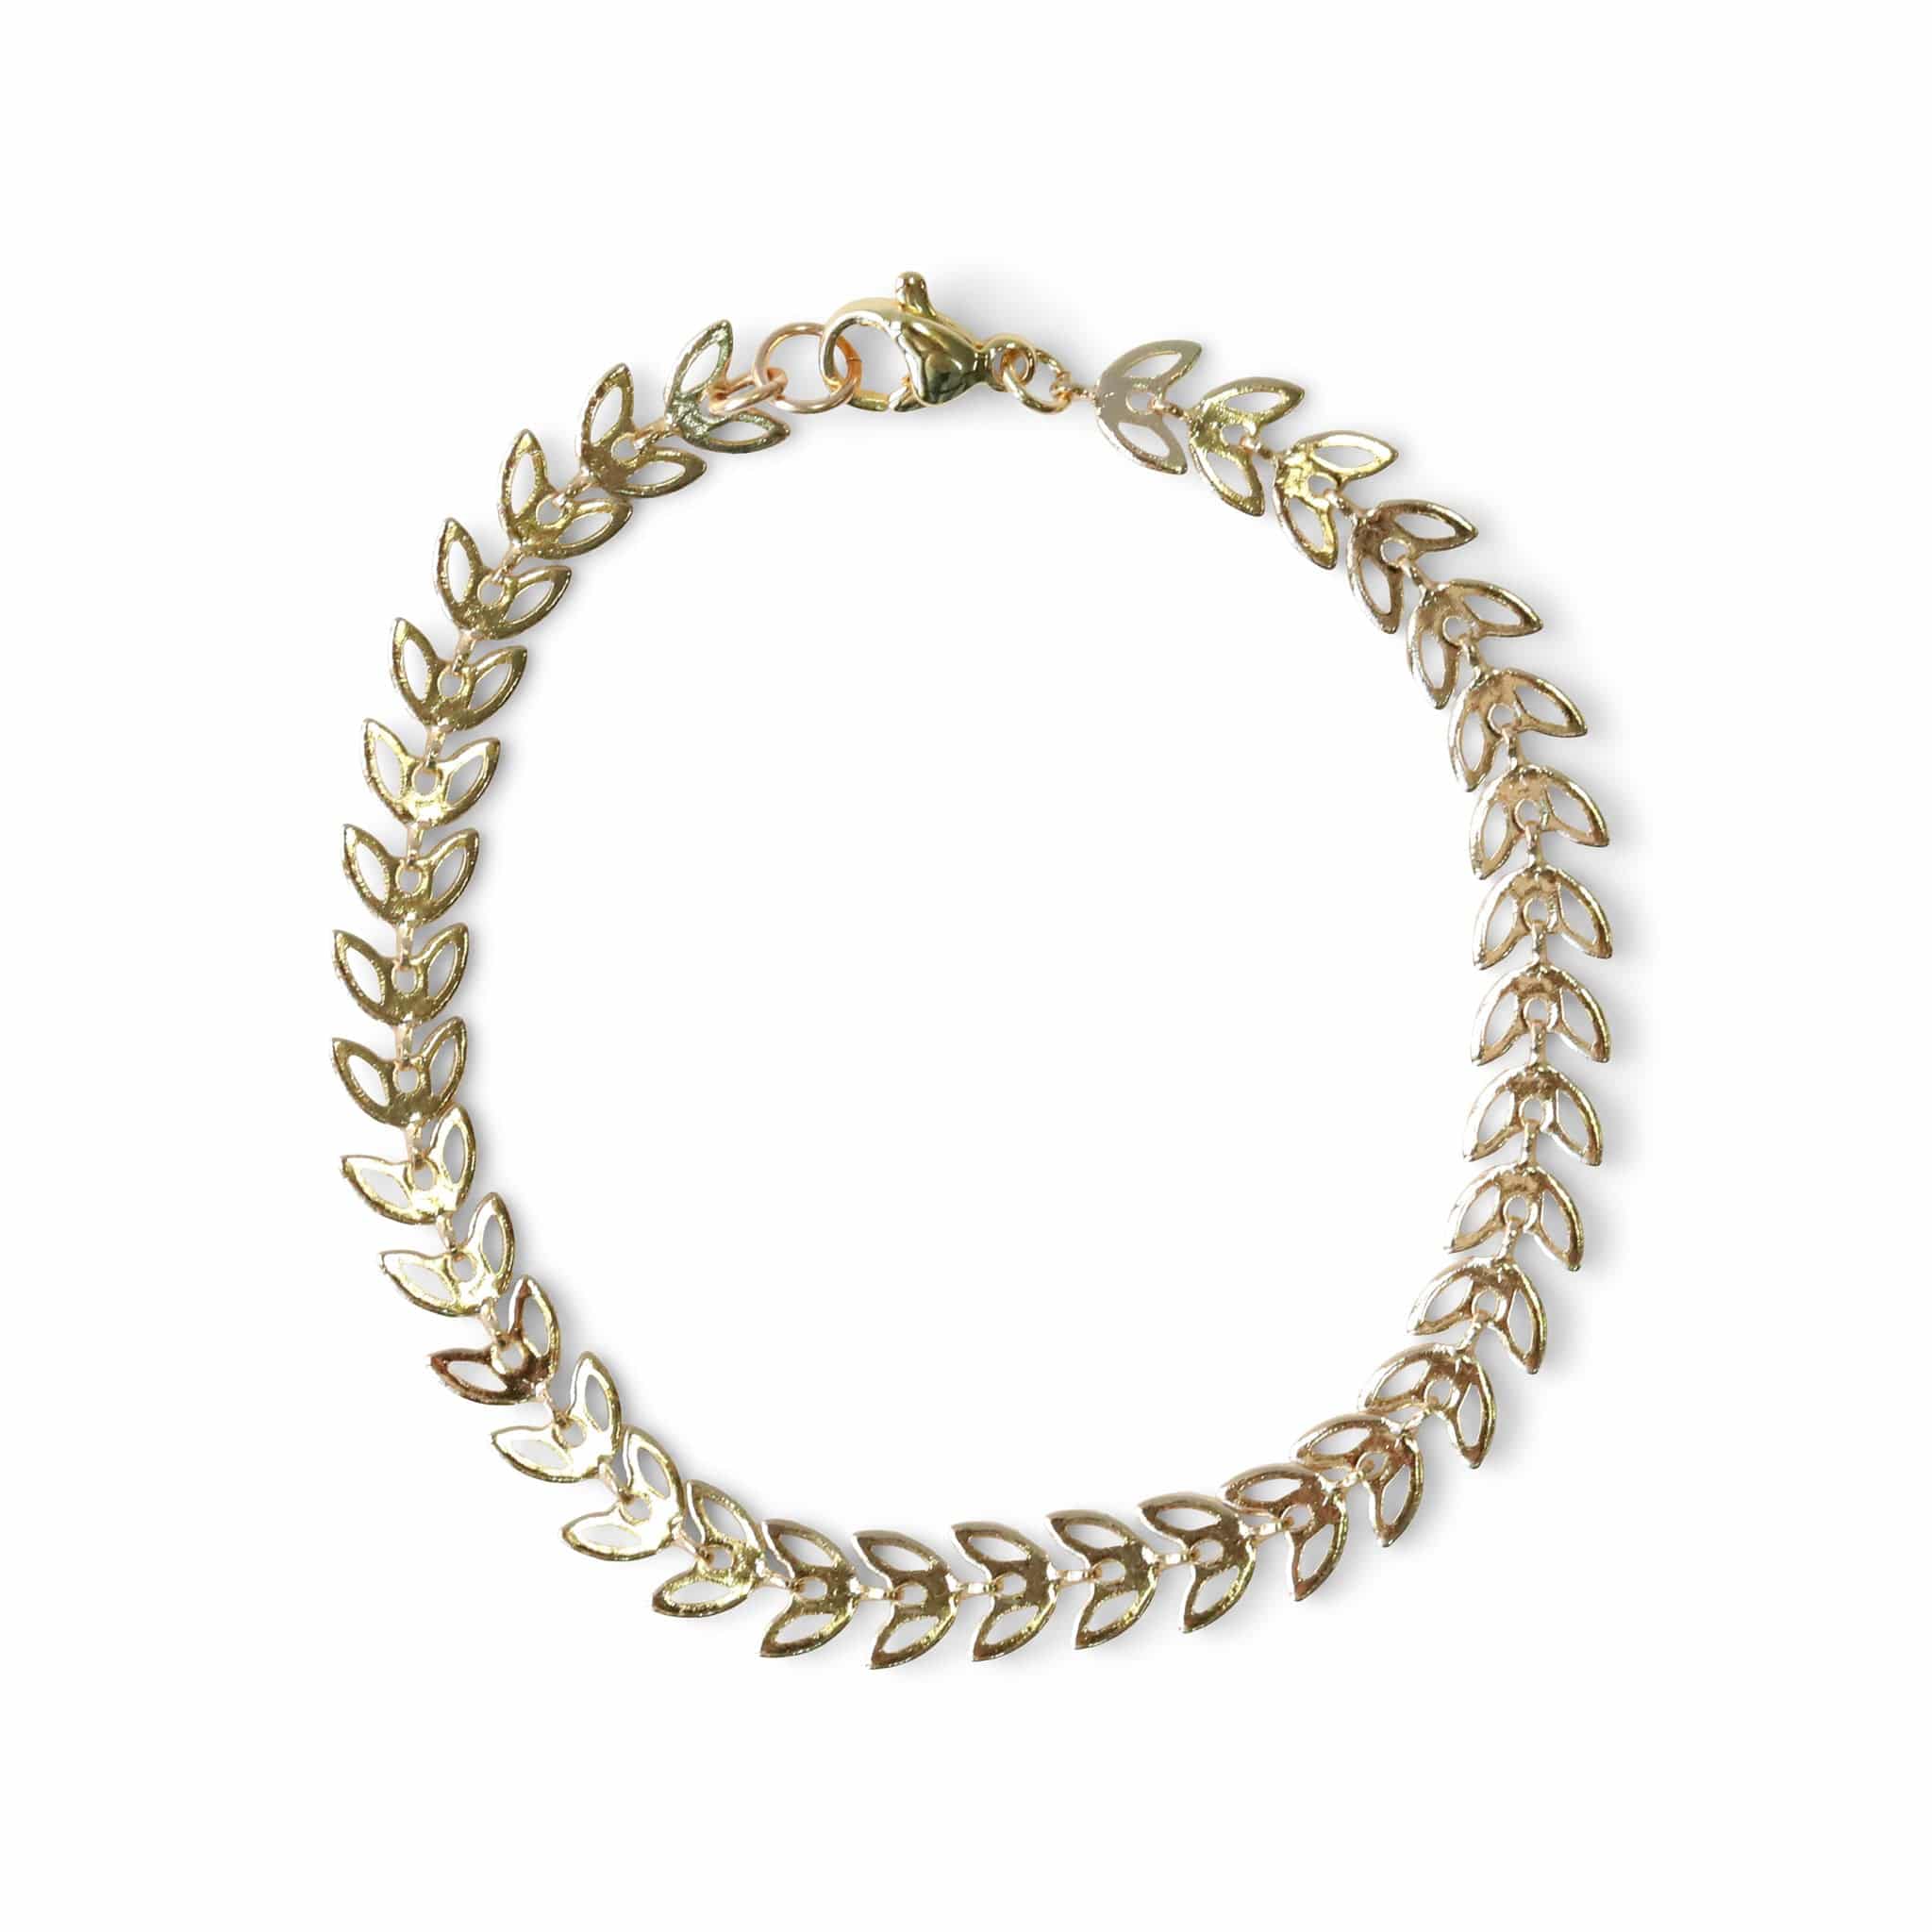 Fae Leaf Chain Bracelet - The Gilded Witch